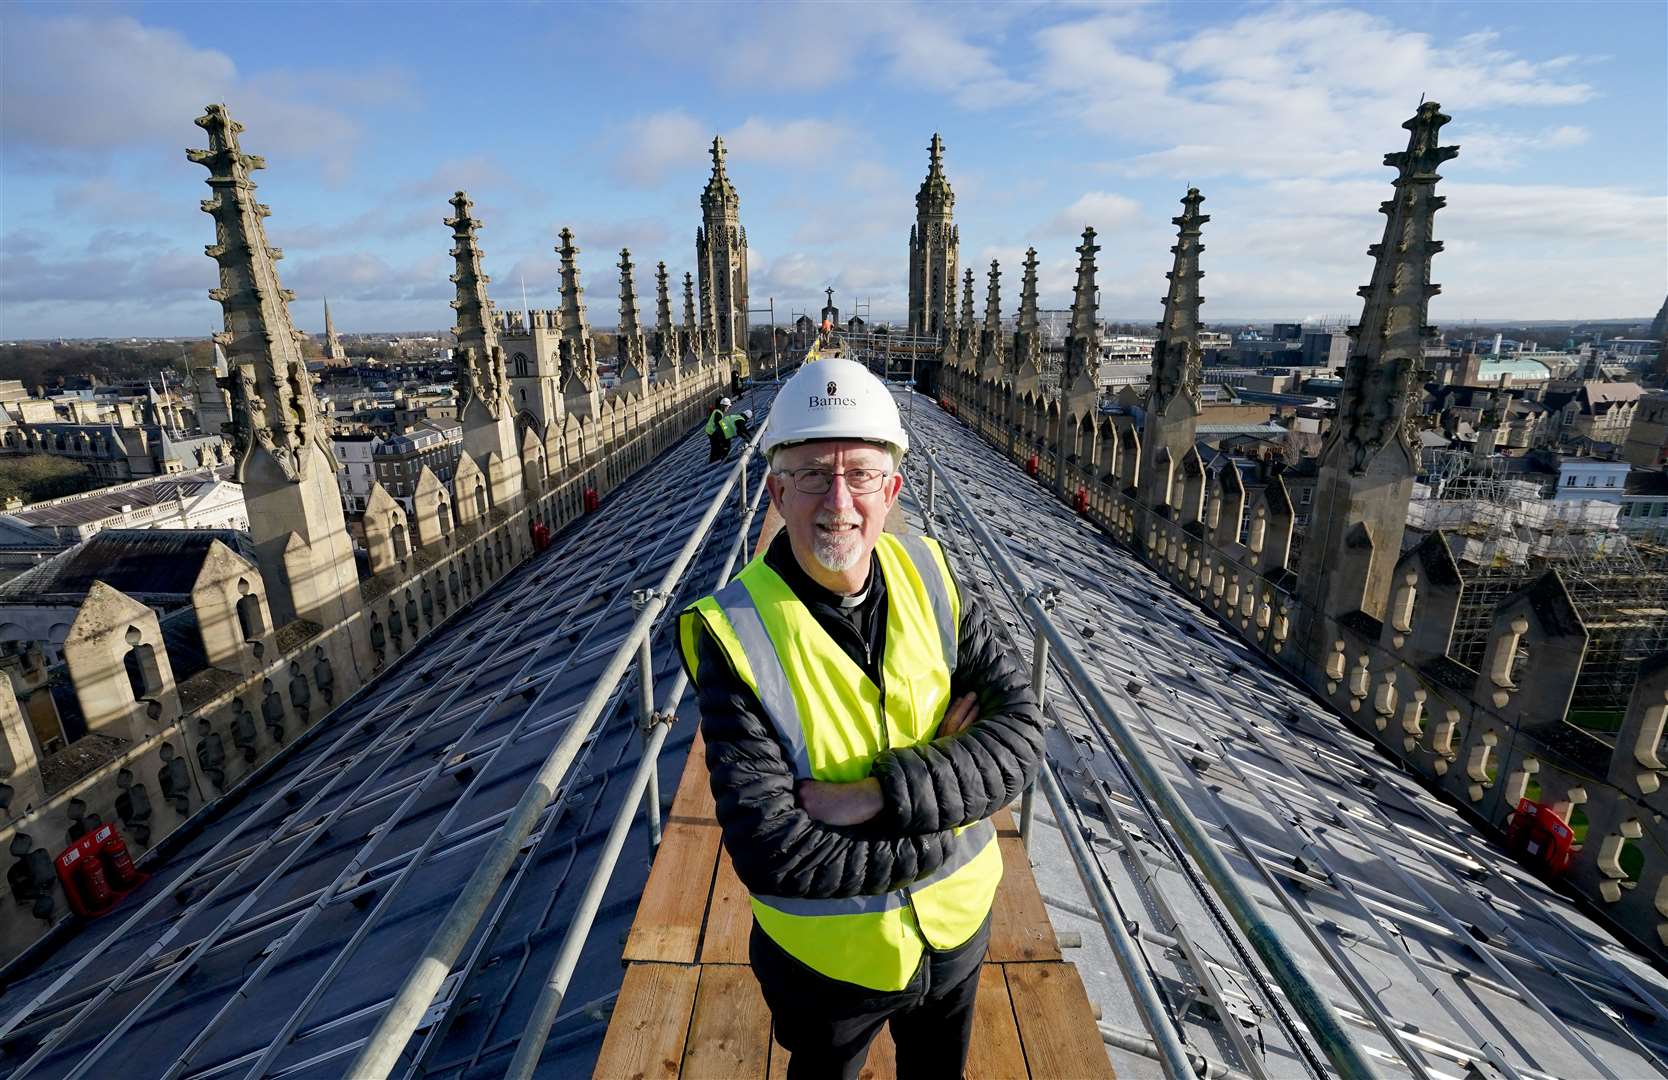 Stephen Cherry, Dean of King’s College Chapel, views the installation of 438 new photovoltaic solar panels (Gareth Fuller/ PA)